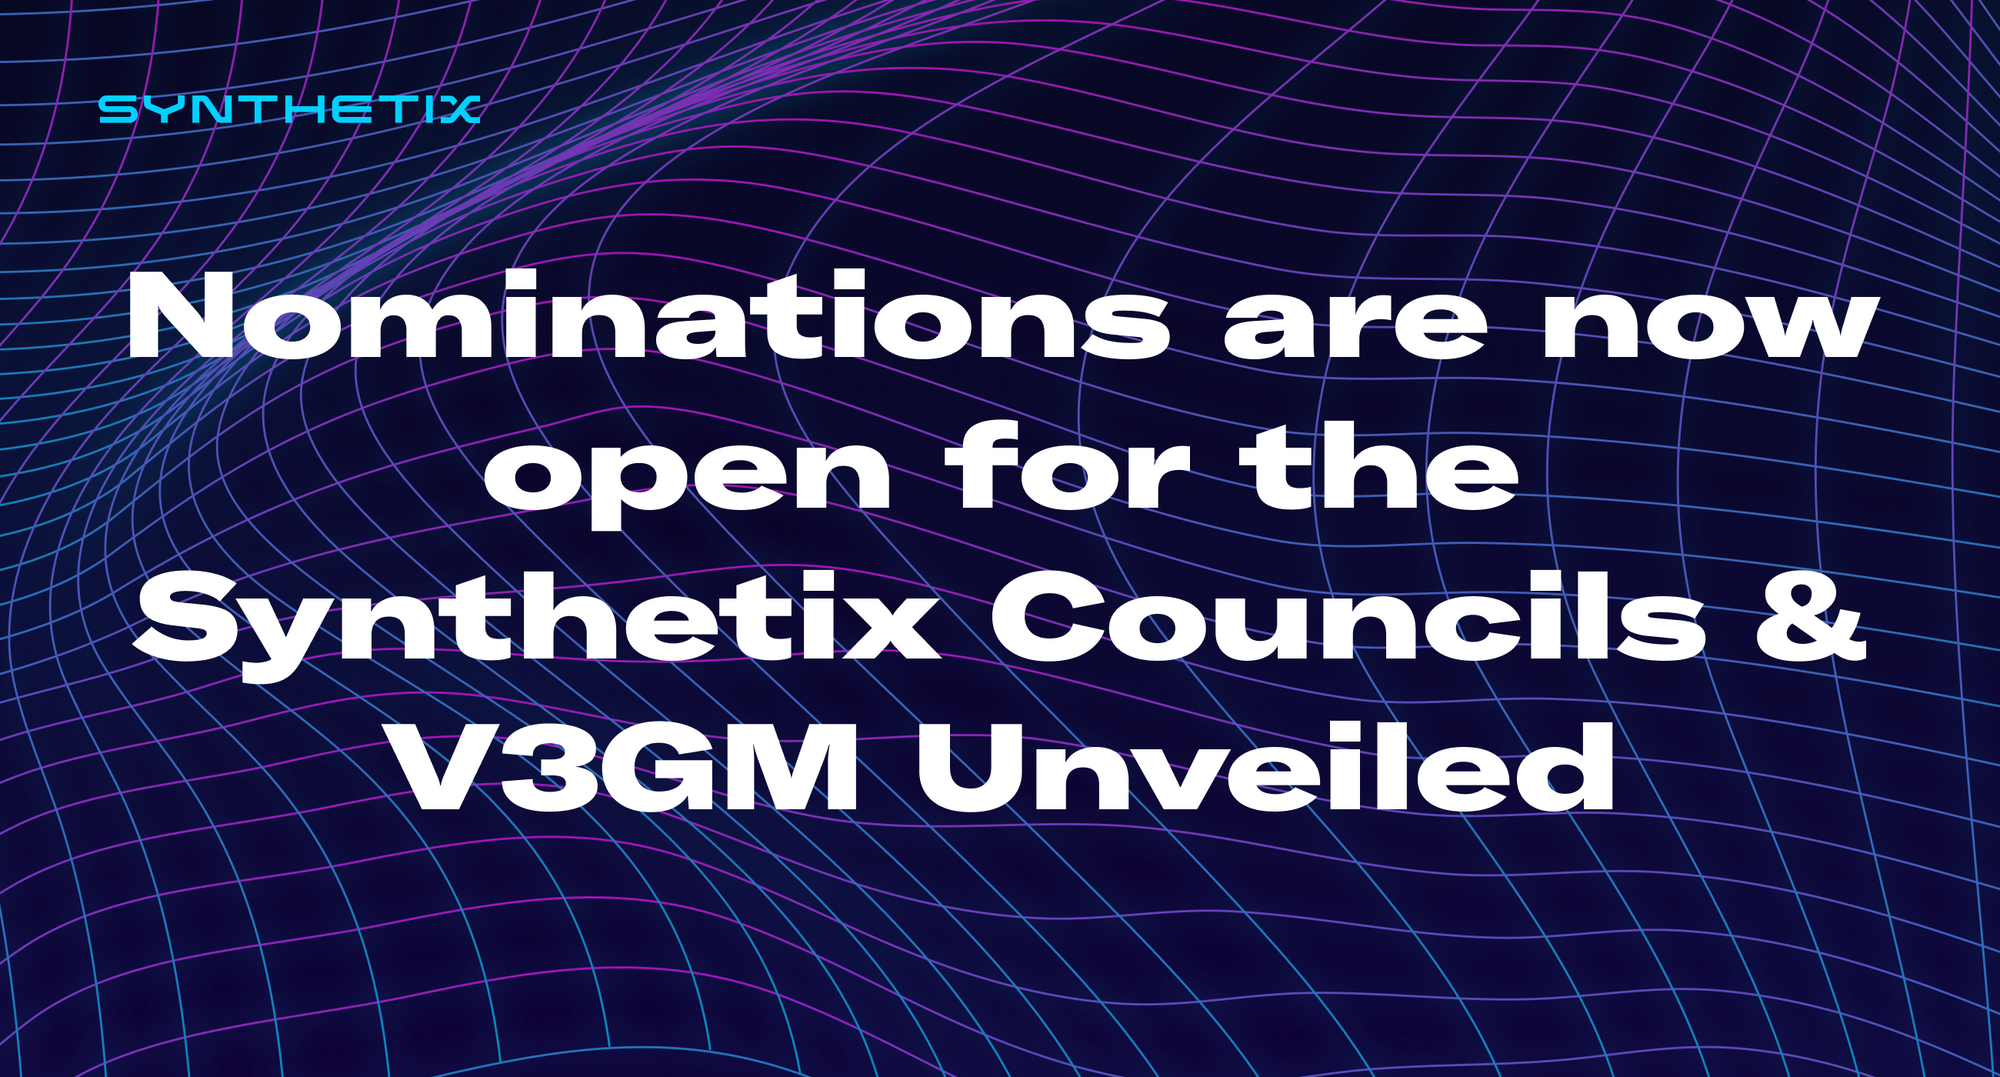 Nominations are now open for  Synthetix Councils & V3GM Election Module